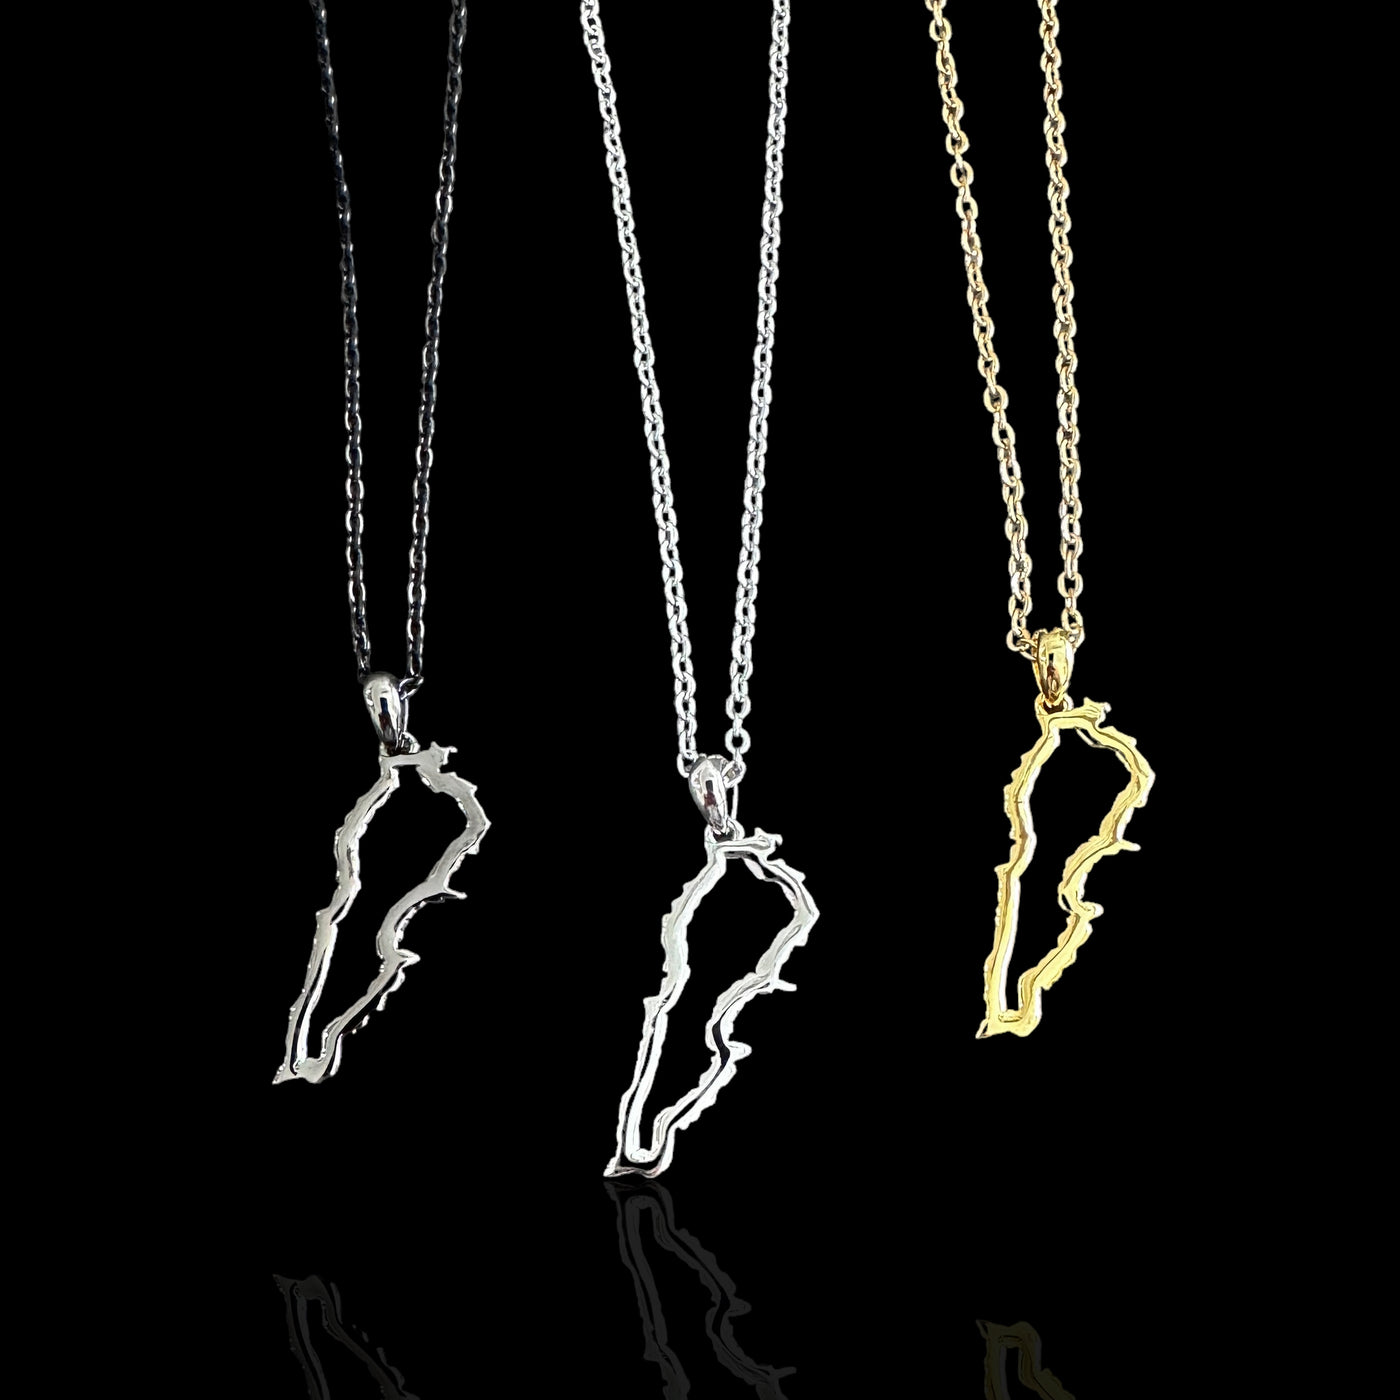 Sterling Silver Lebanon Map Outline Necklace - Available in 3 Colors